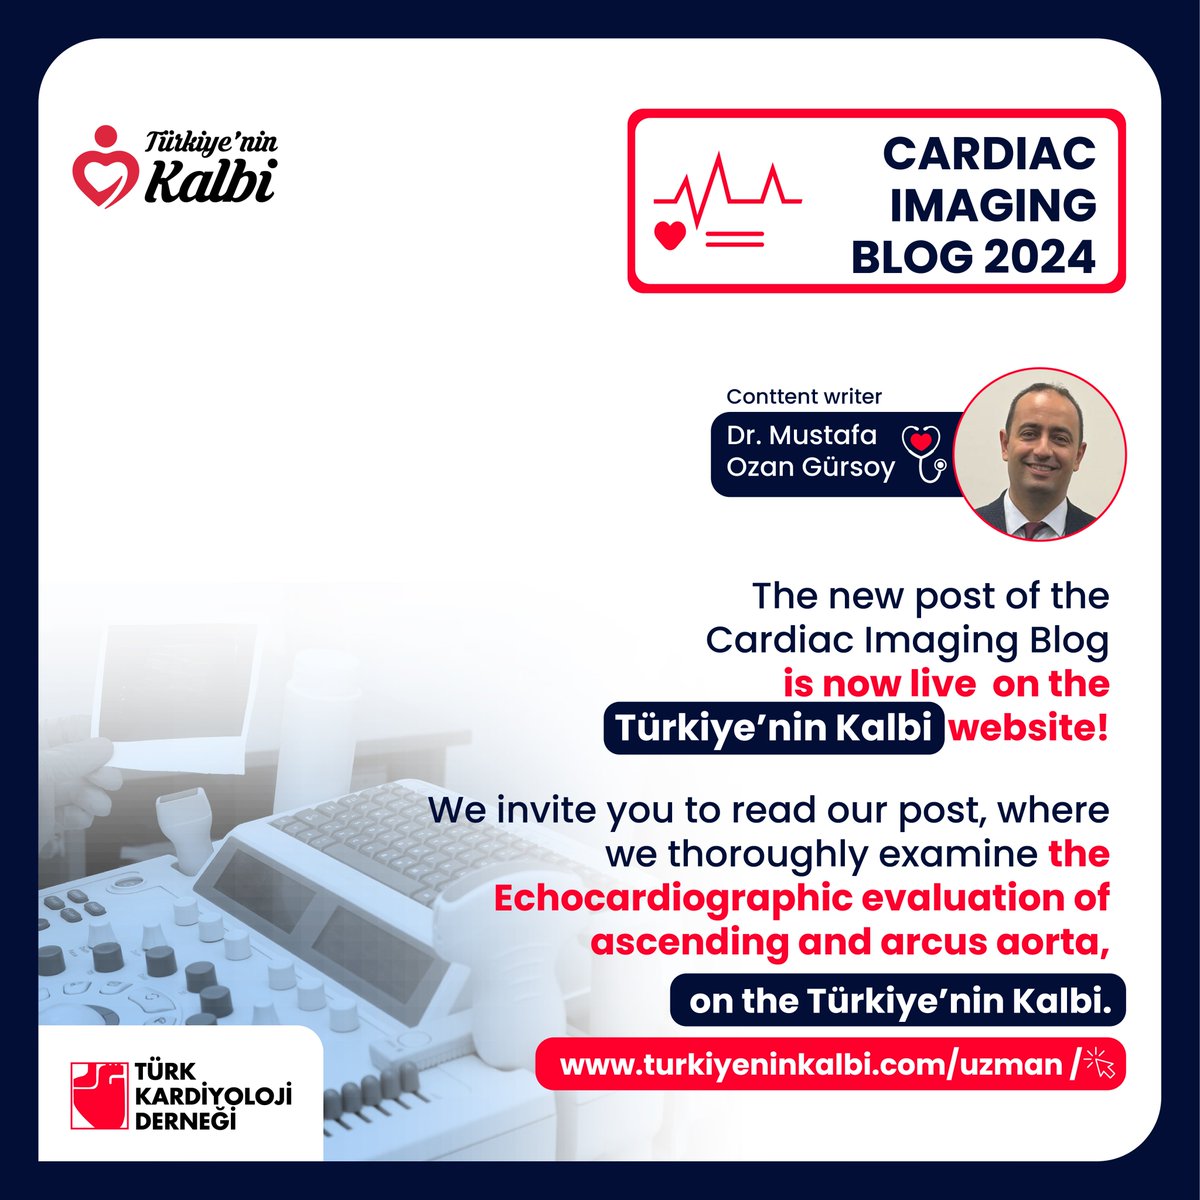 You can access our post published on the Cardiac Imaging Blog, which discusses the echocardiographic measurement of the aorta, including the basic disorders of the ascending aorta and aortic arch, from our Türkiye’nin Kalbi website through an expert entry. turkiyeninkalbi.com/uzman/blog/how…